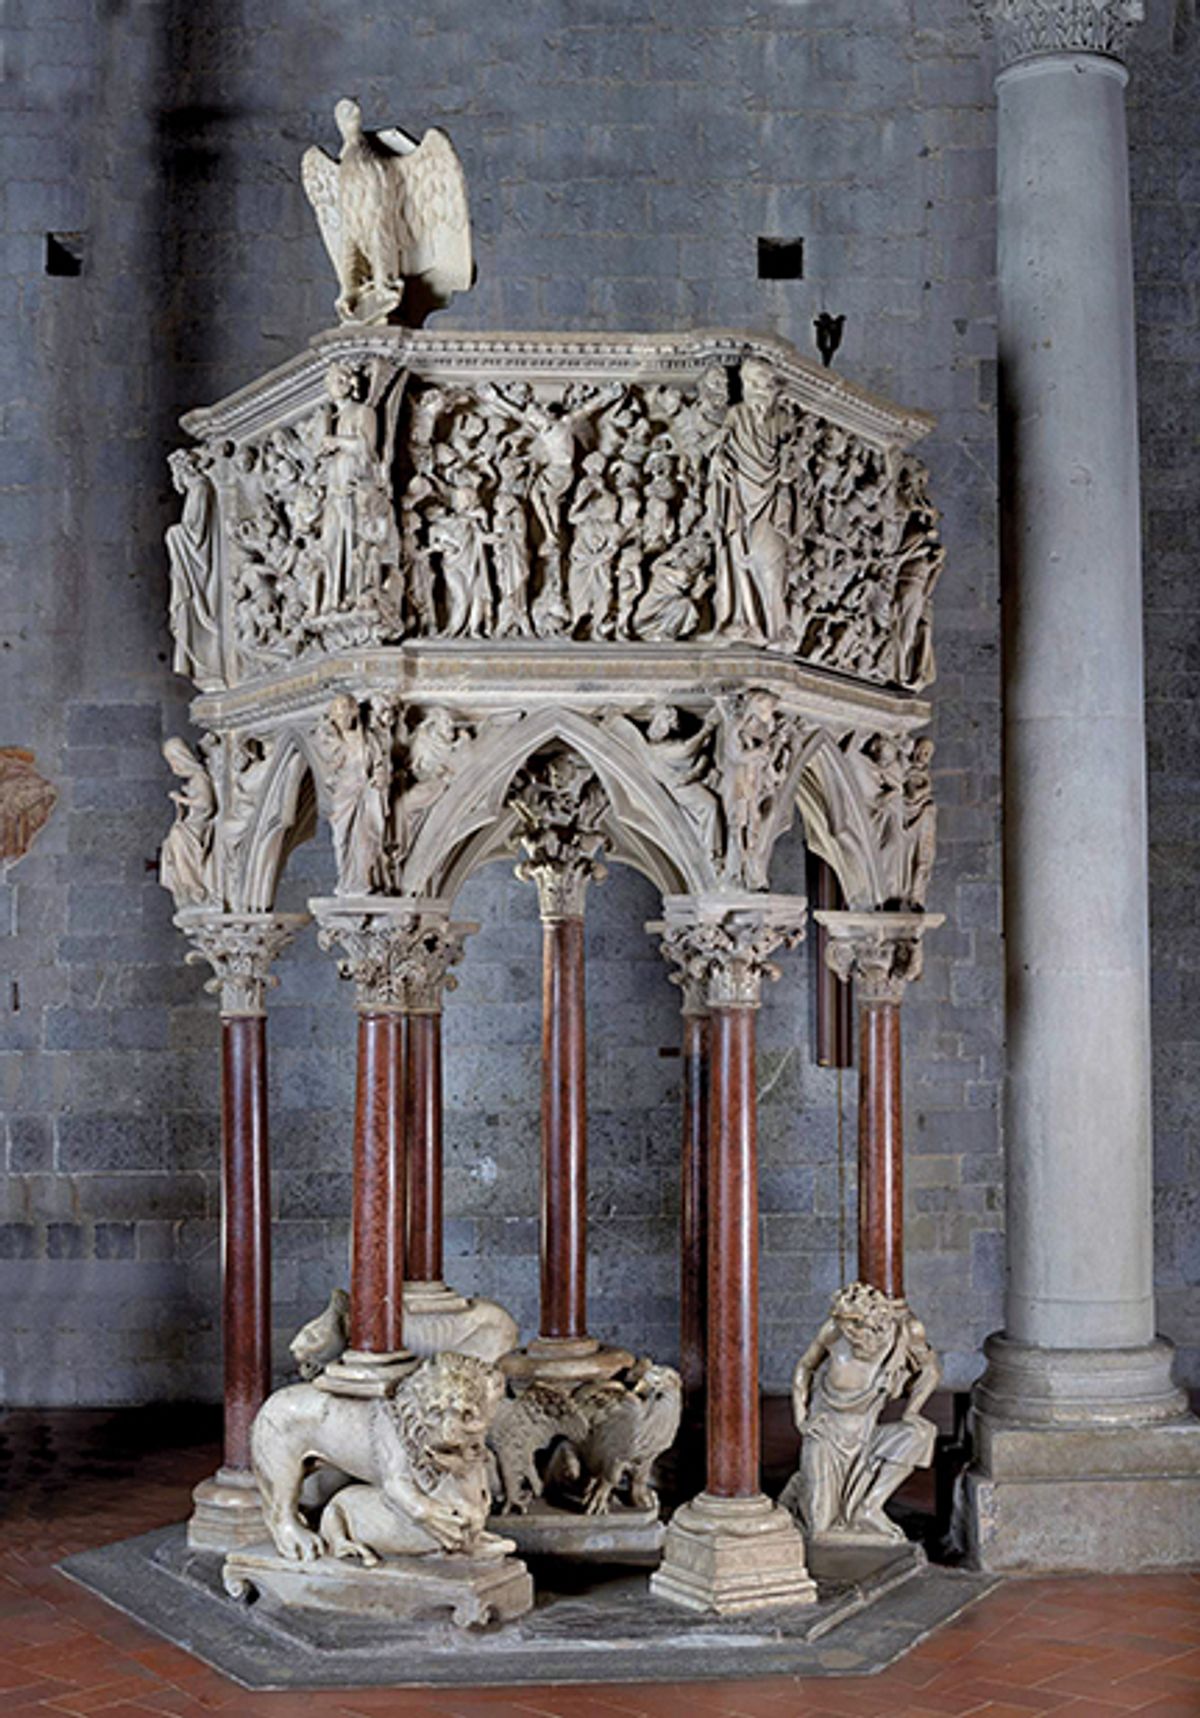 A pulpit carved by Giovanni Pisano is to be restored in Pistoia, Italy Photo: Nicolò Begliomini; courtesy of Friends of Florence